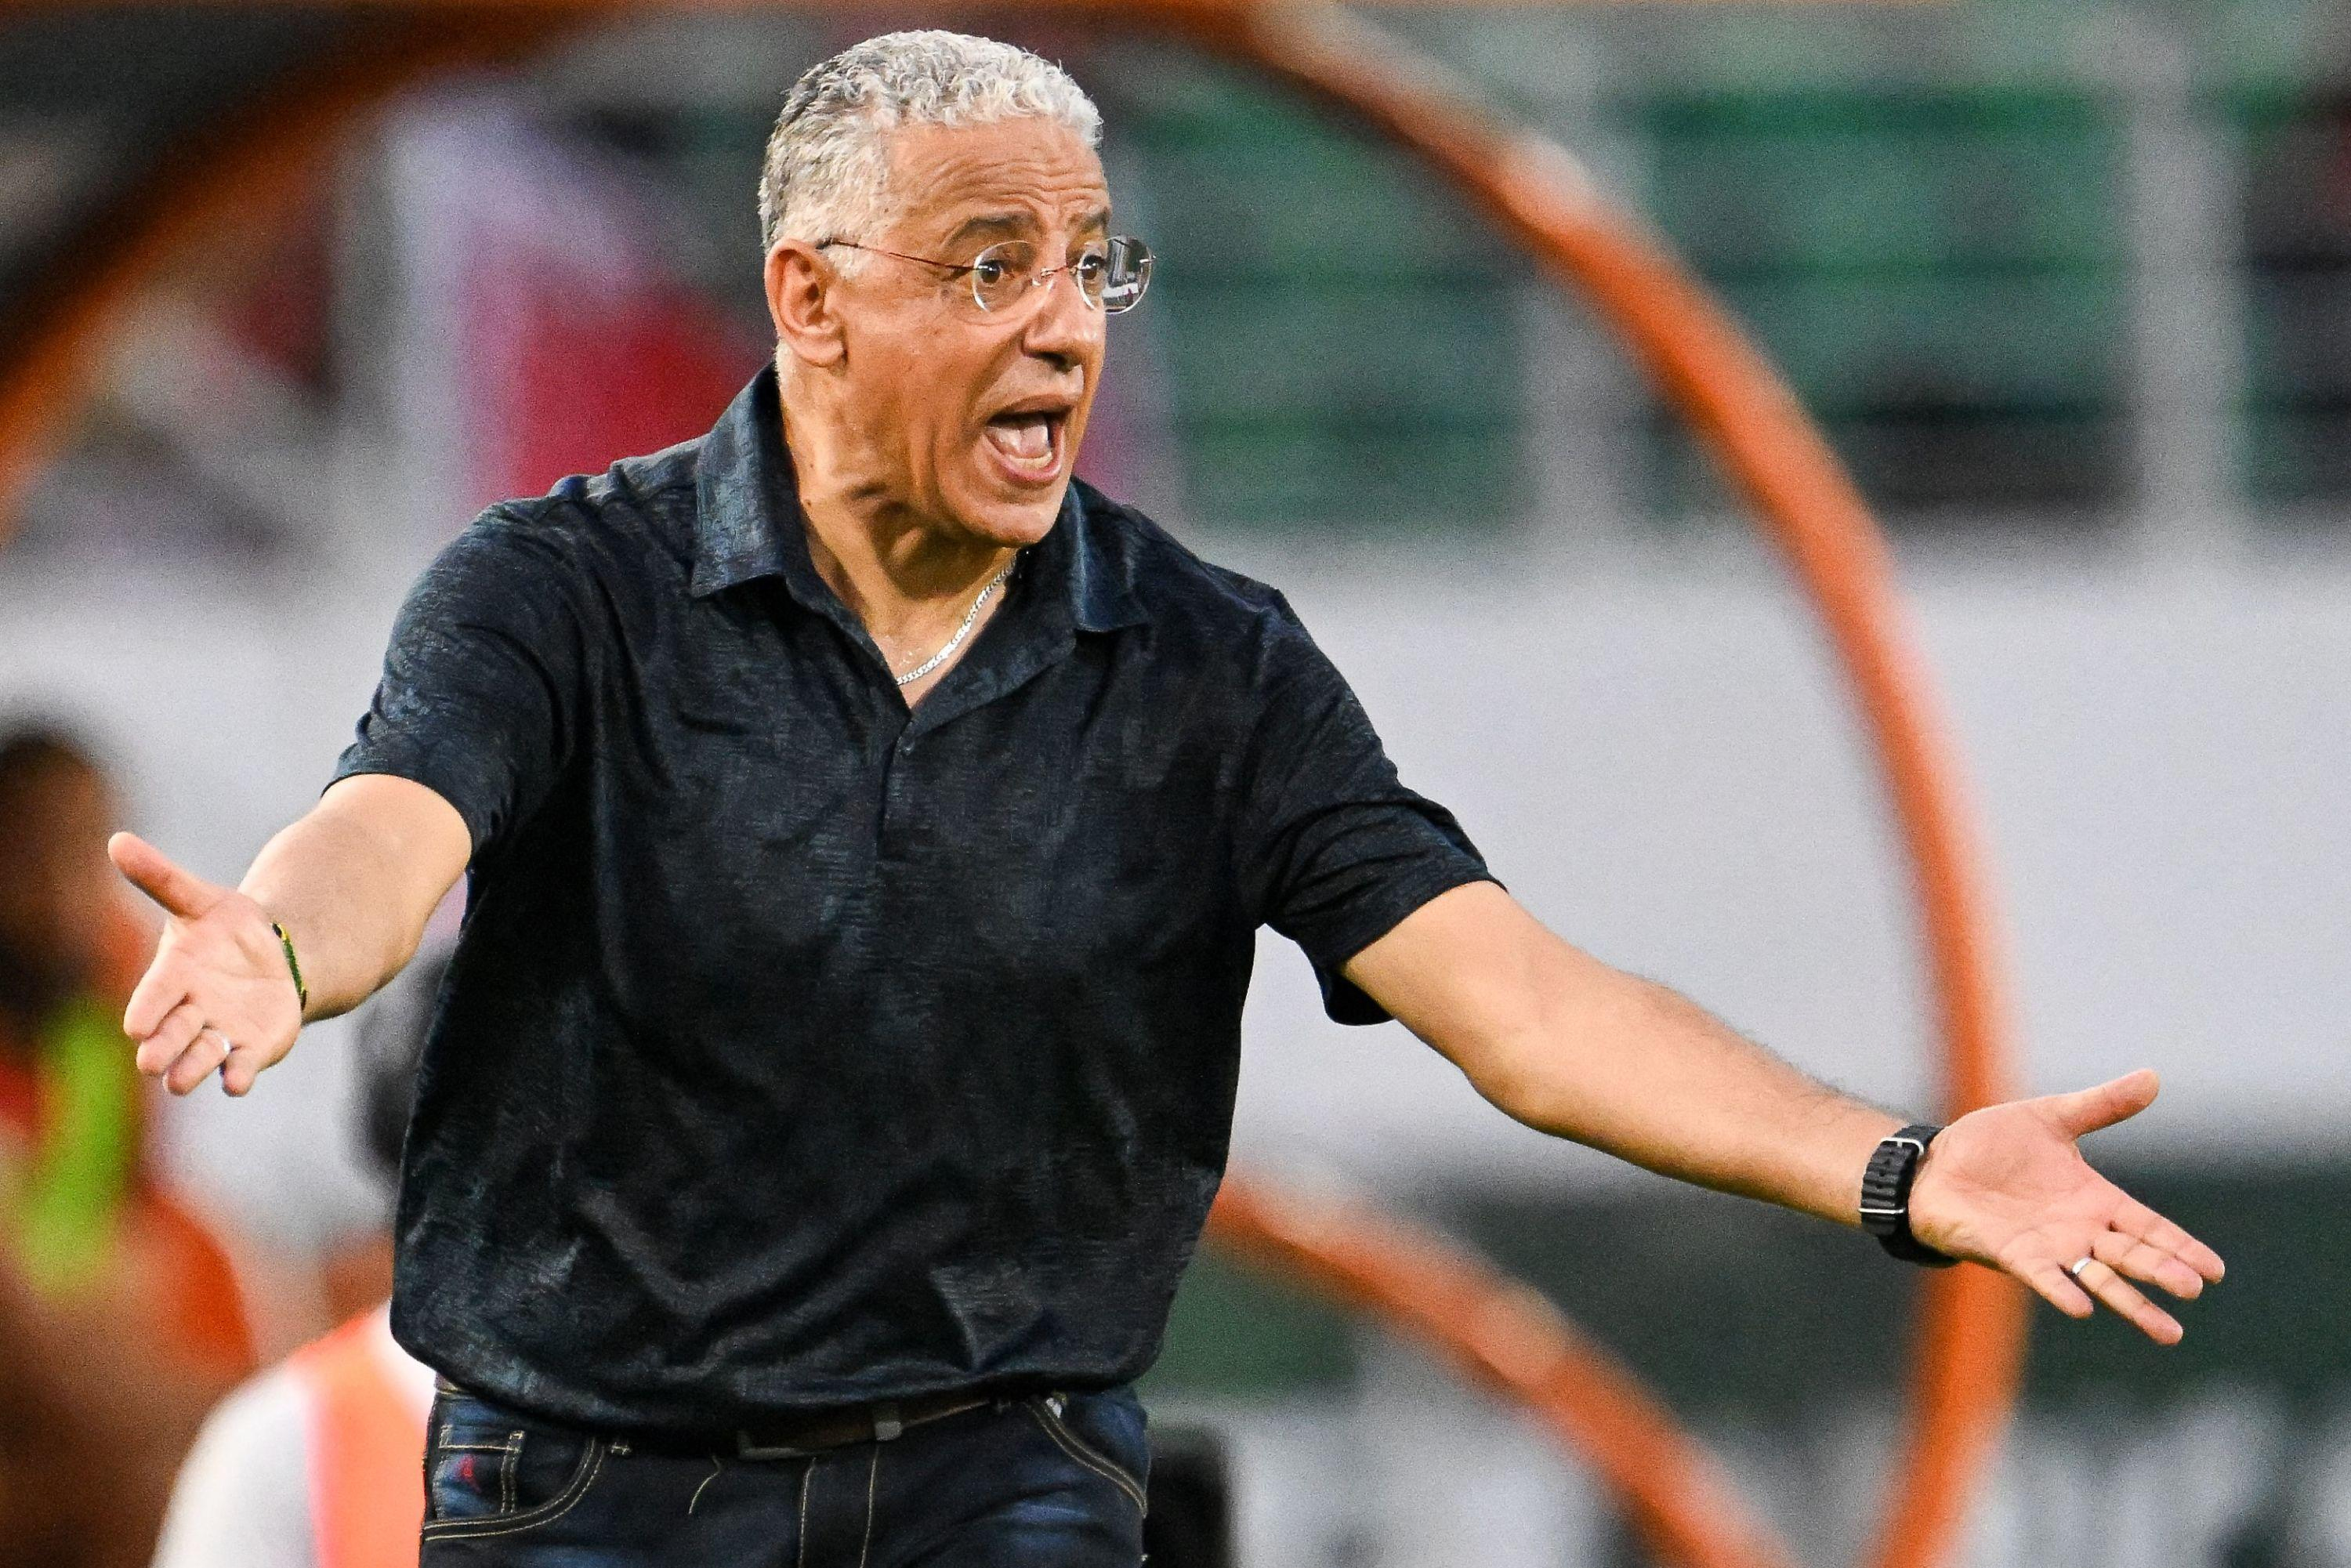 “Morocco chooses its referees”: Tanzania coach dismissed